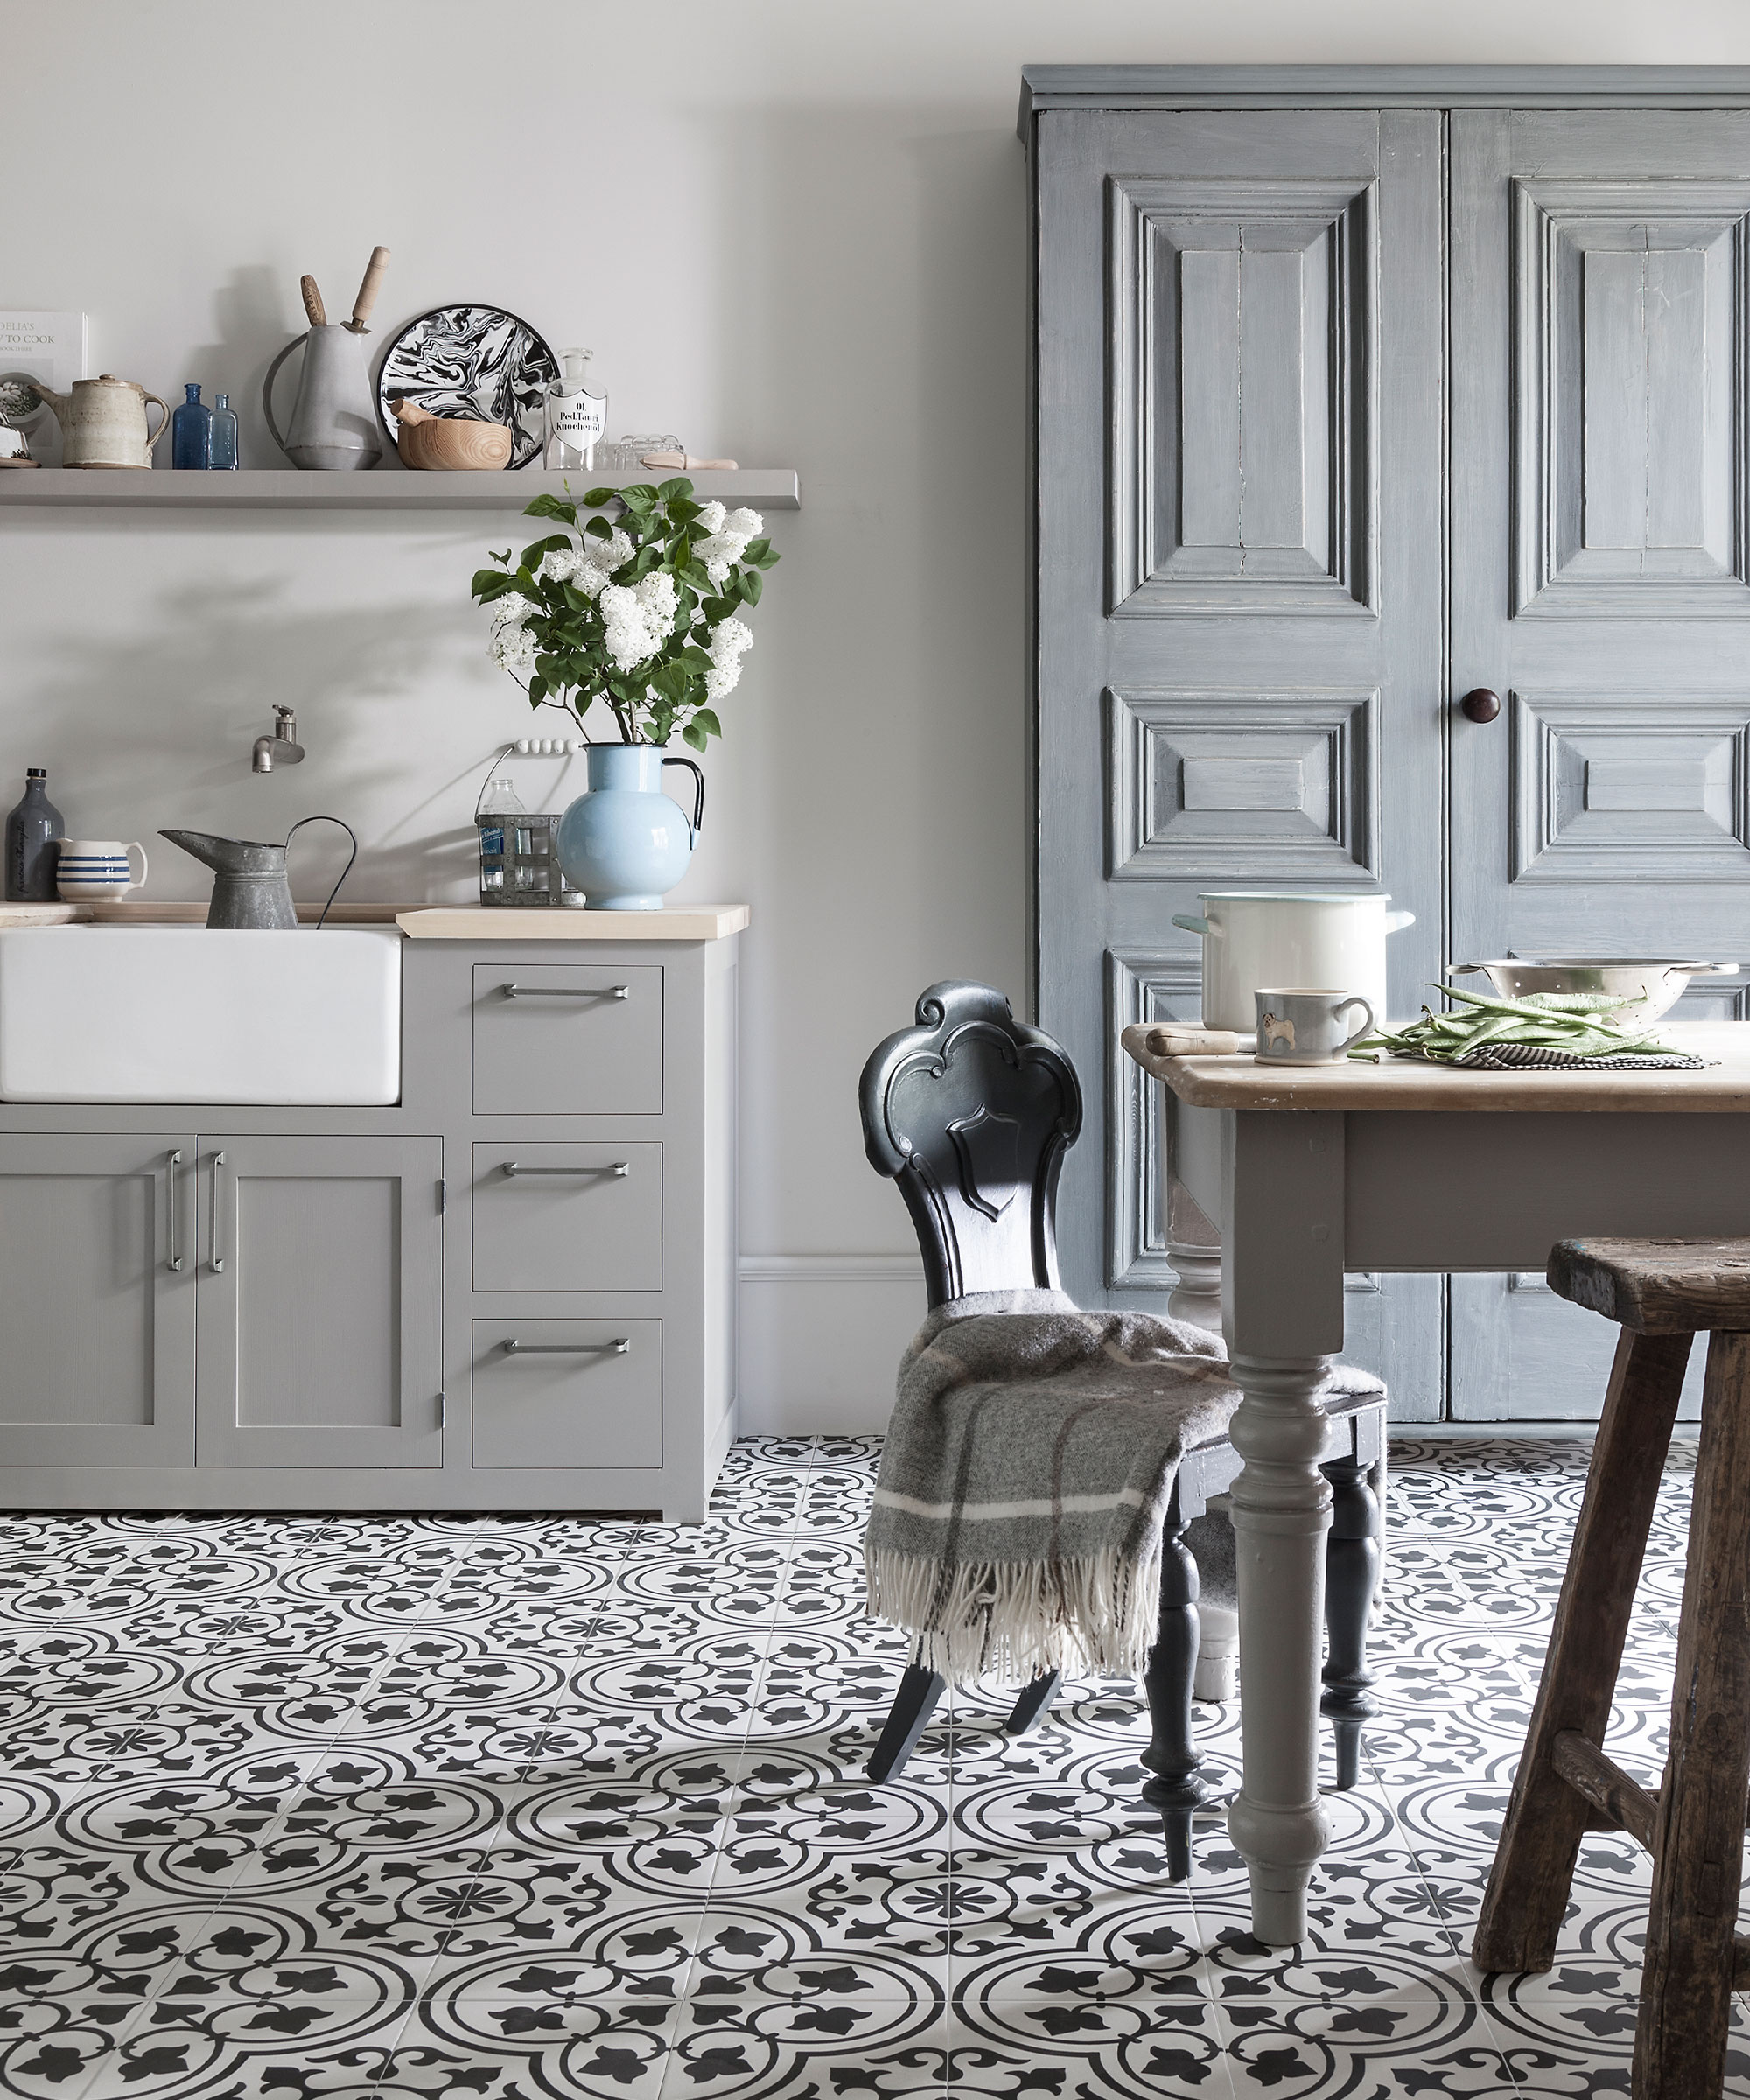 Dining-kitchen space with cuban, black and white floor tiles, traditional wooden dining table with gray painted frame, gray painted cabinet and kitchen unit, gray shelf decorated with ornaments and kitchen accessories